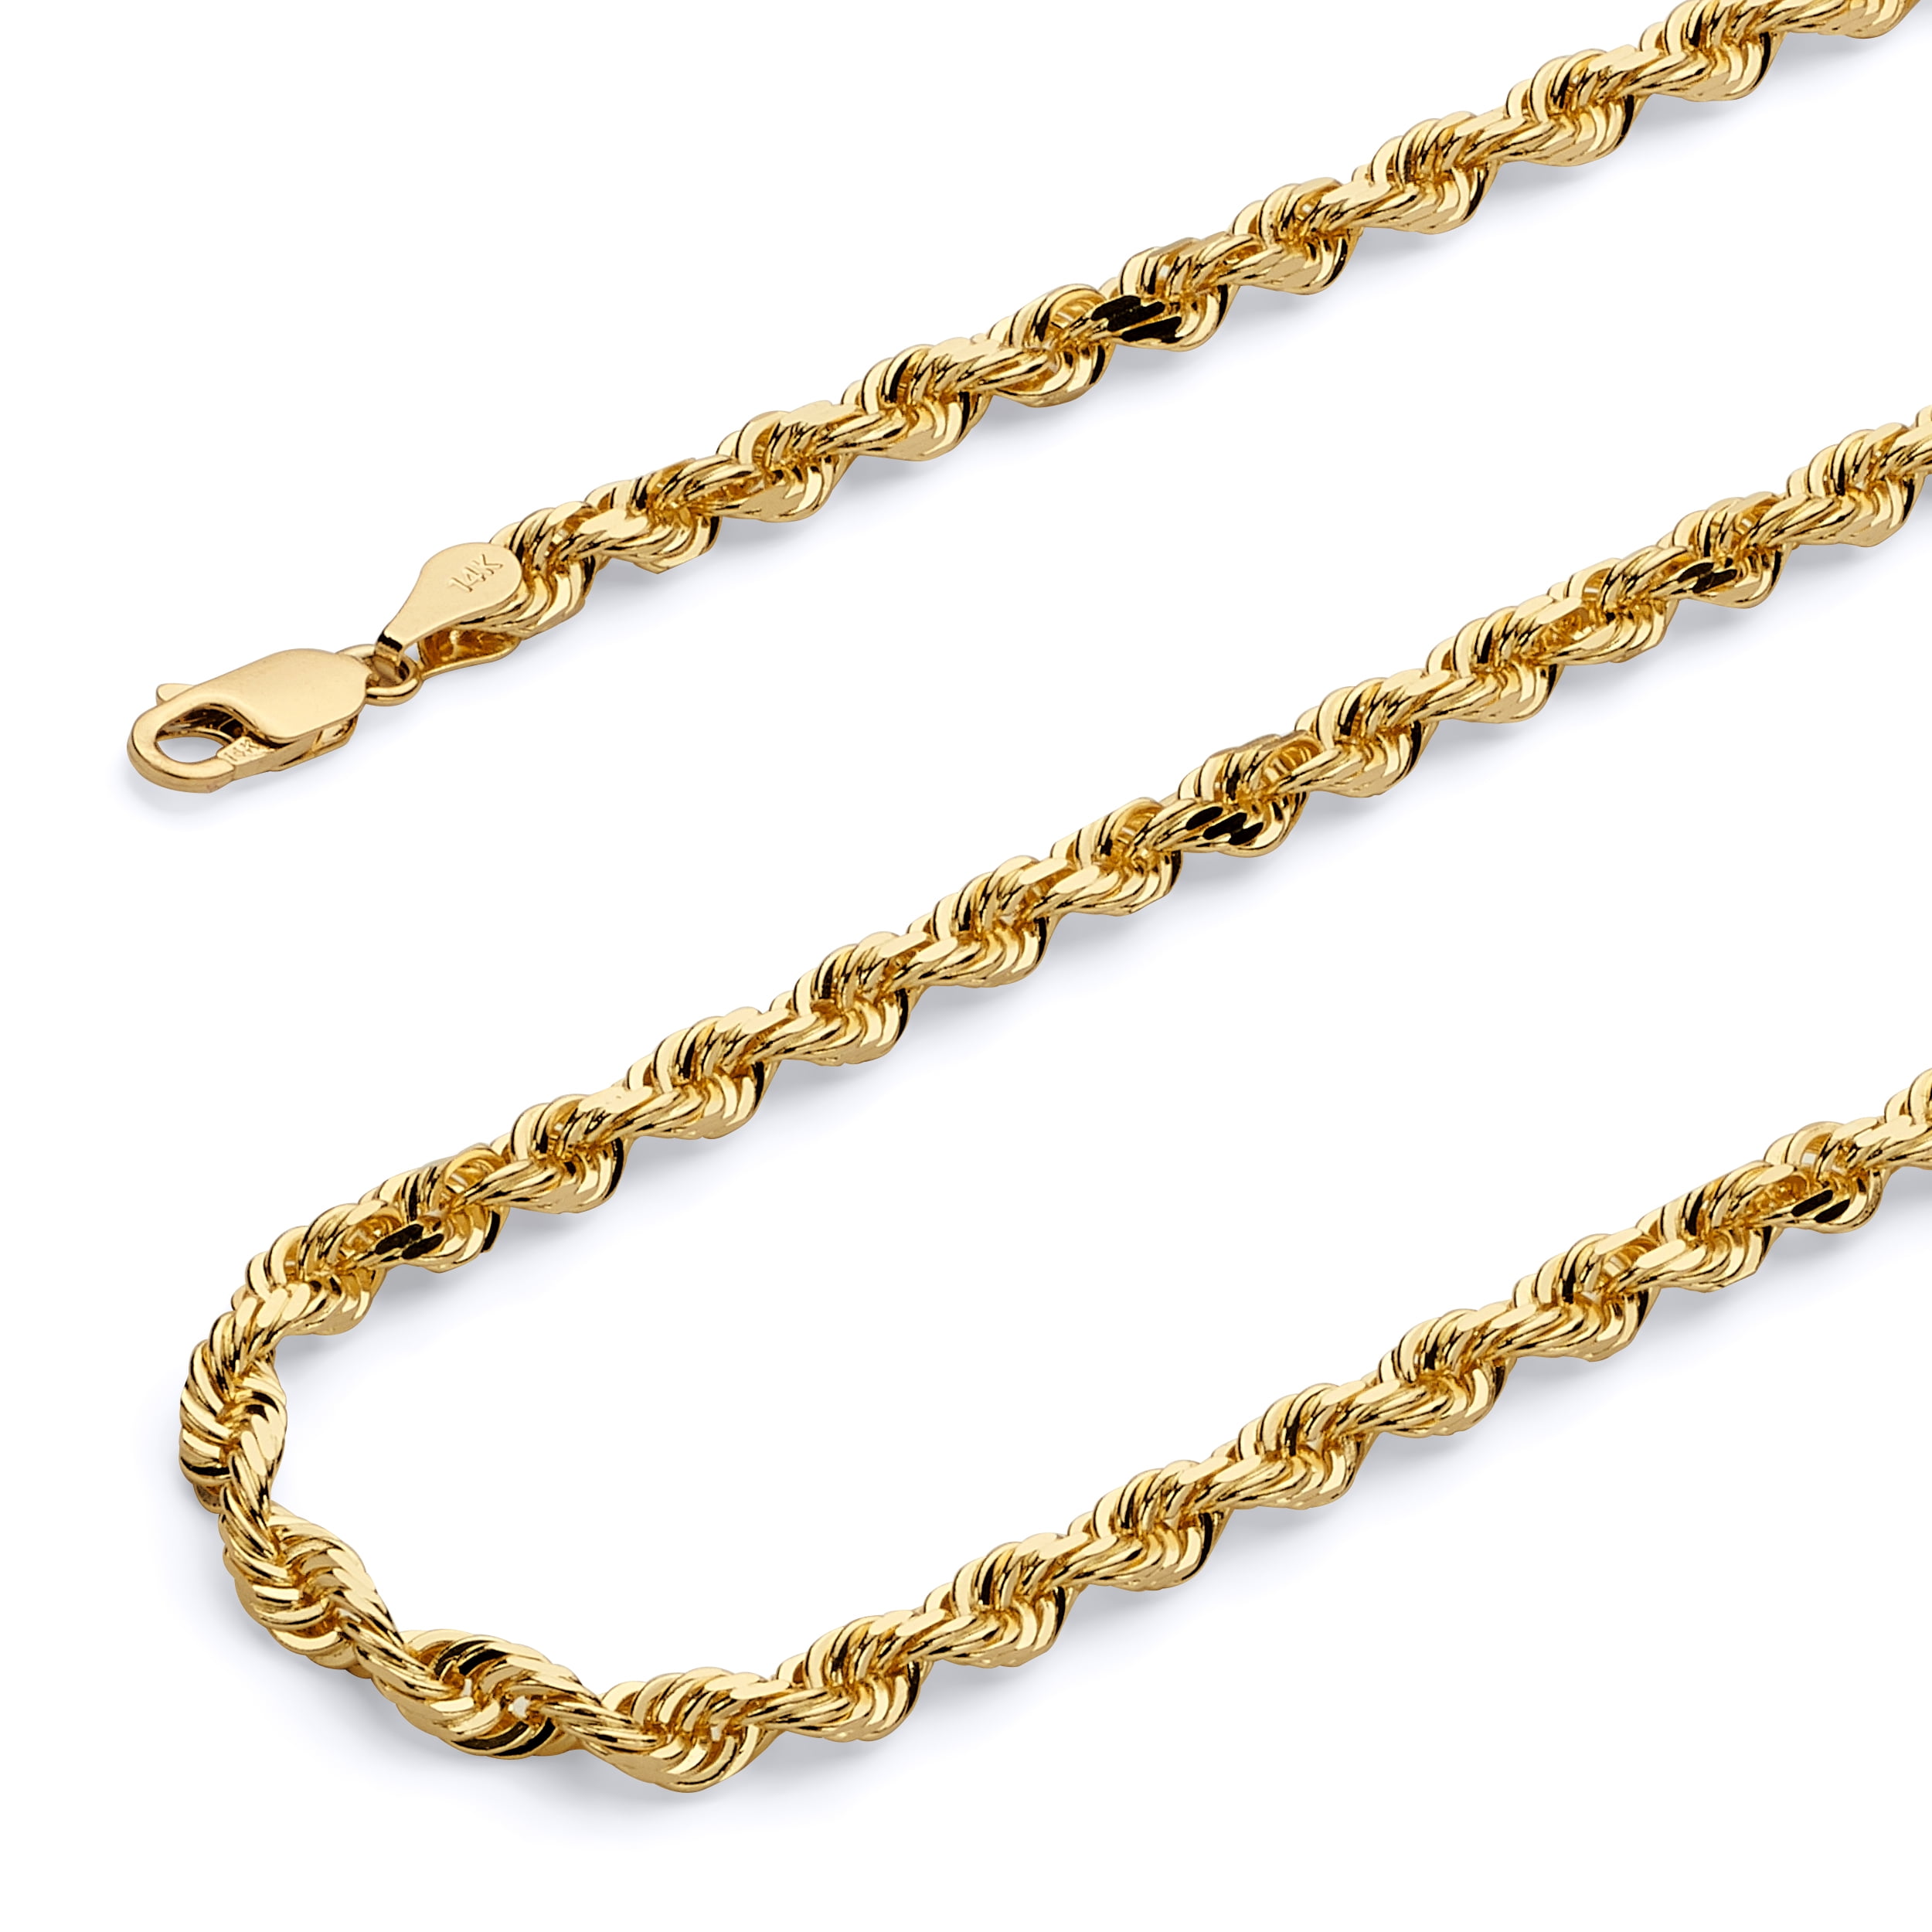 Wellingsale 14k Yellow Gold 2mm Double Link HOLLOW Rope Chain Necklace